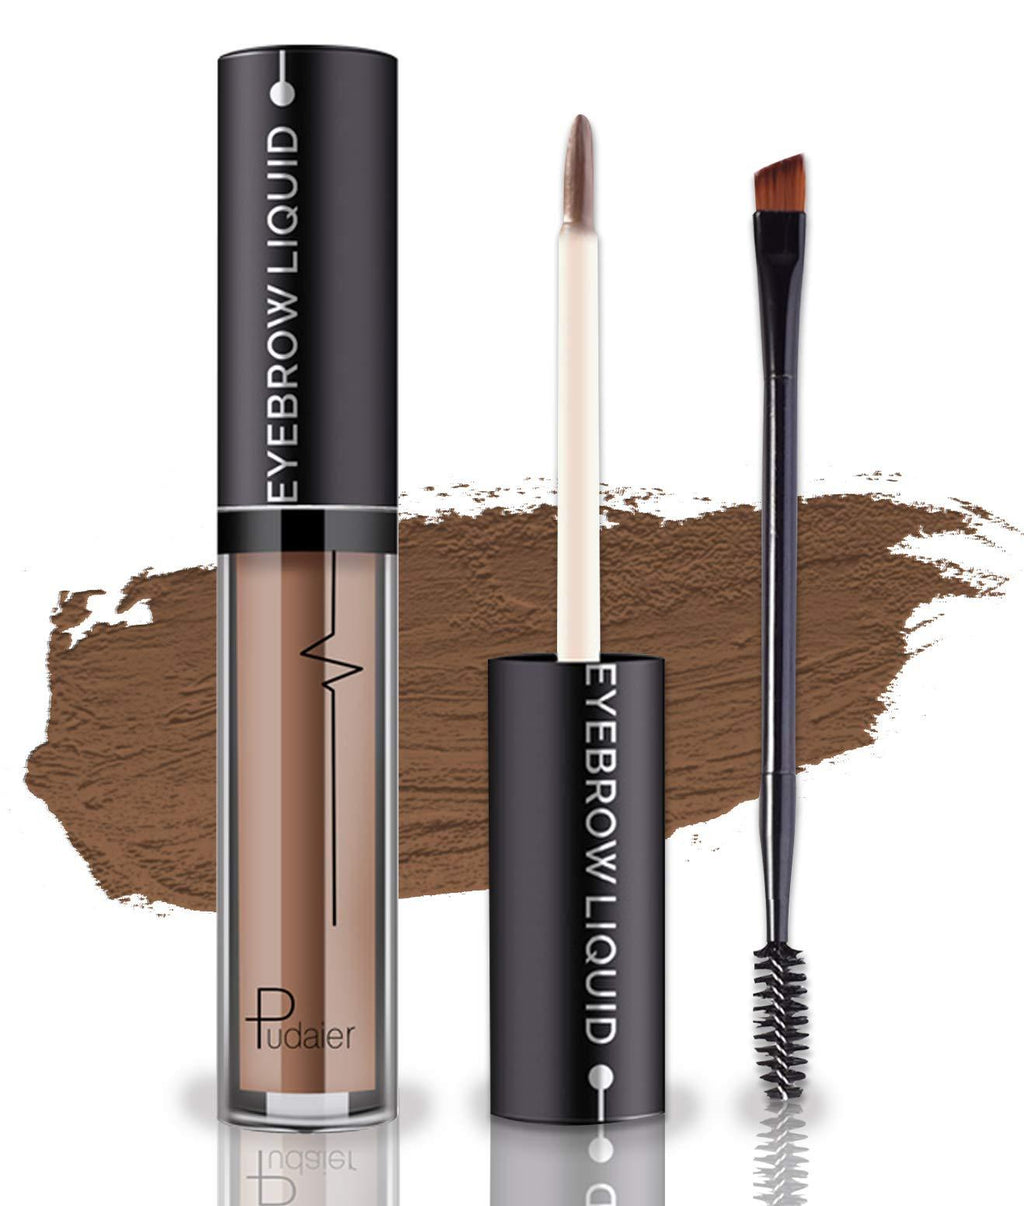 [Australia] - Waterproof Eyebrow Gel, Long Lasting Smudge-Proof Liquid Brow Makeup Tint, Brow Shaper with Mascara Primer Brush Wand Kit Gifts for Women (Color-Brown) 02-Brown 